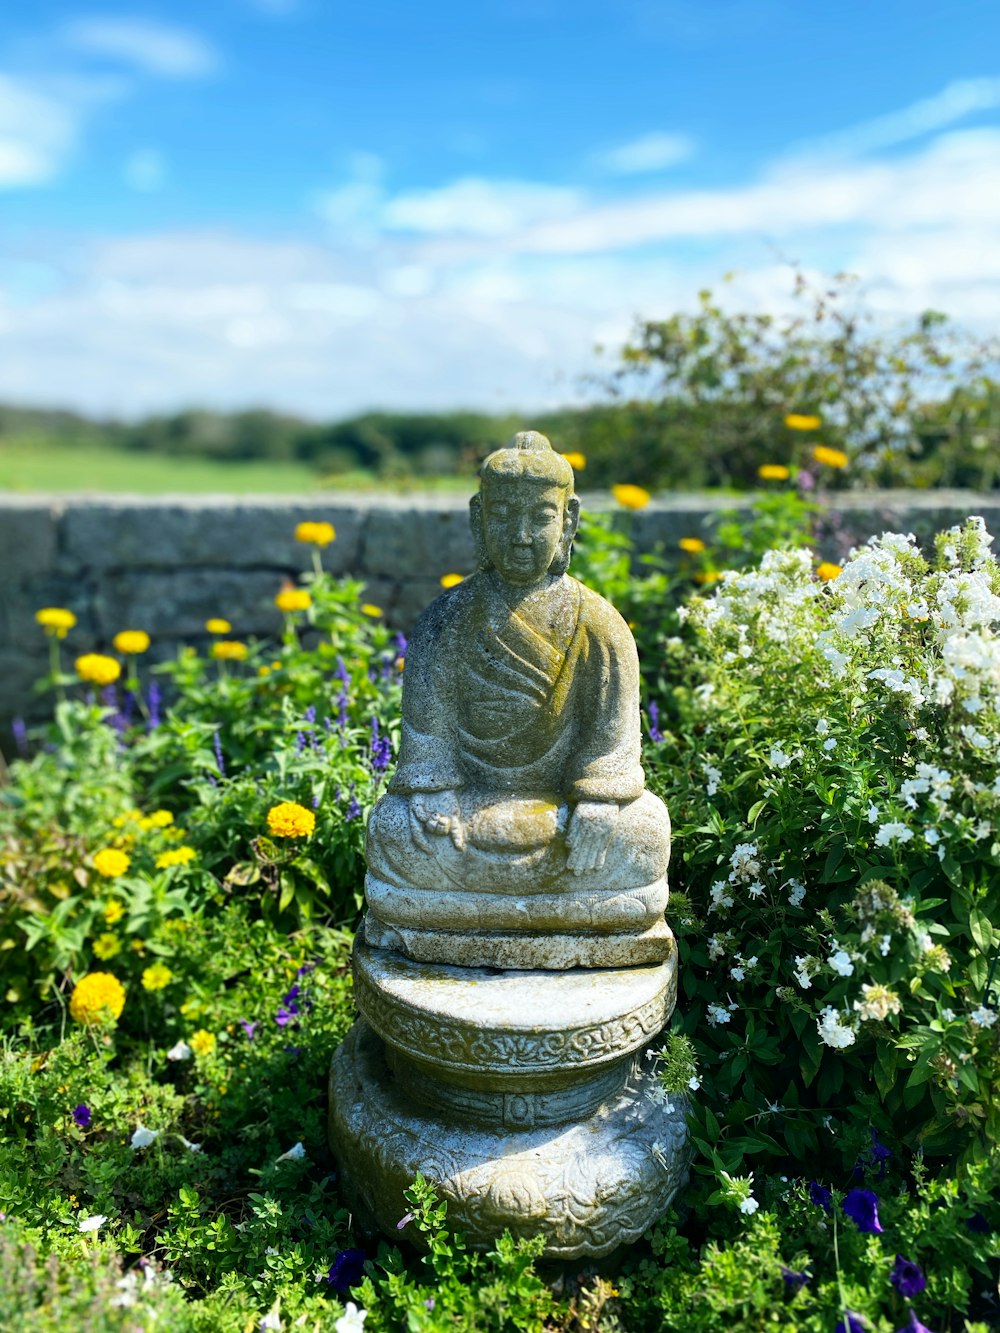 gold buddha statue on green grass field during daytime